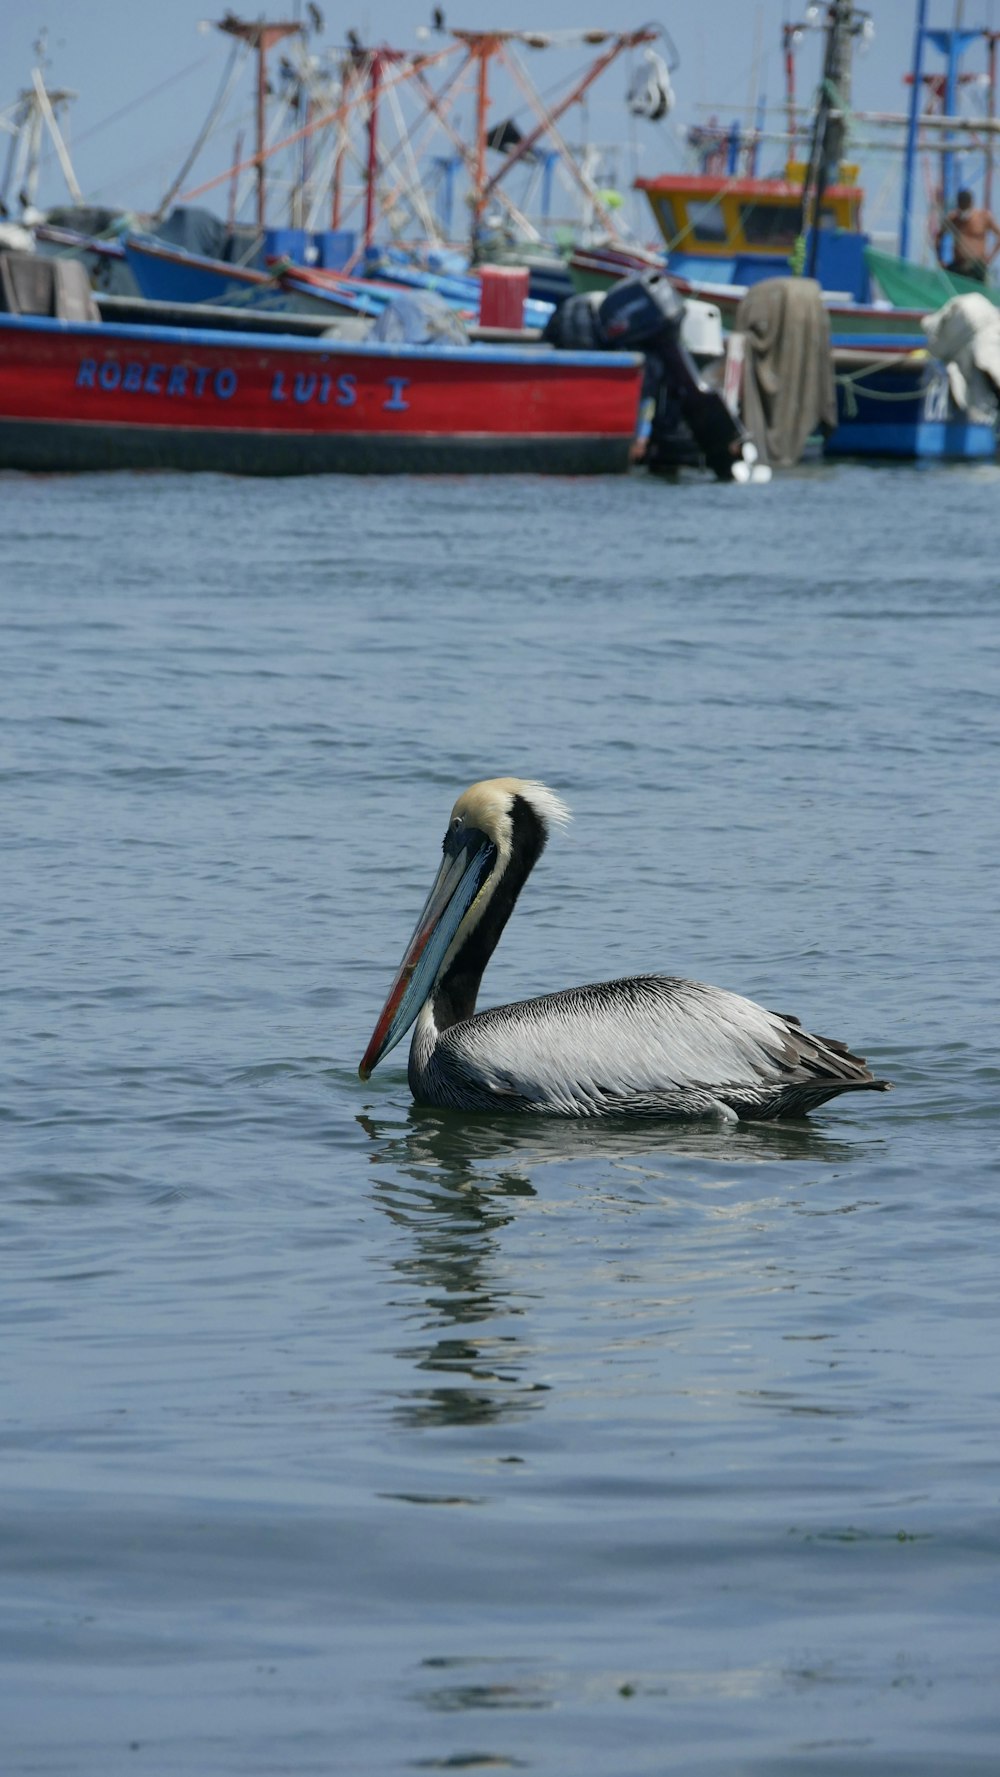 a pelican is swimming in the water near boats